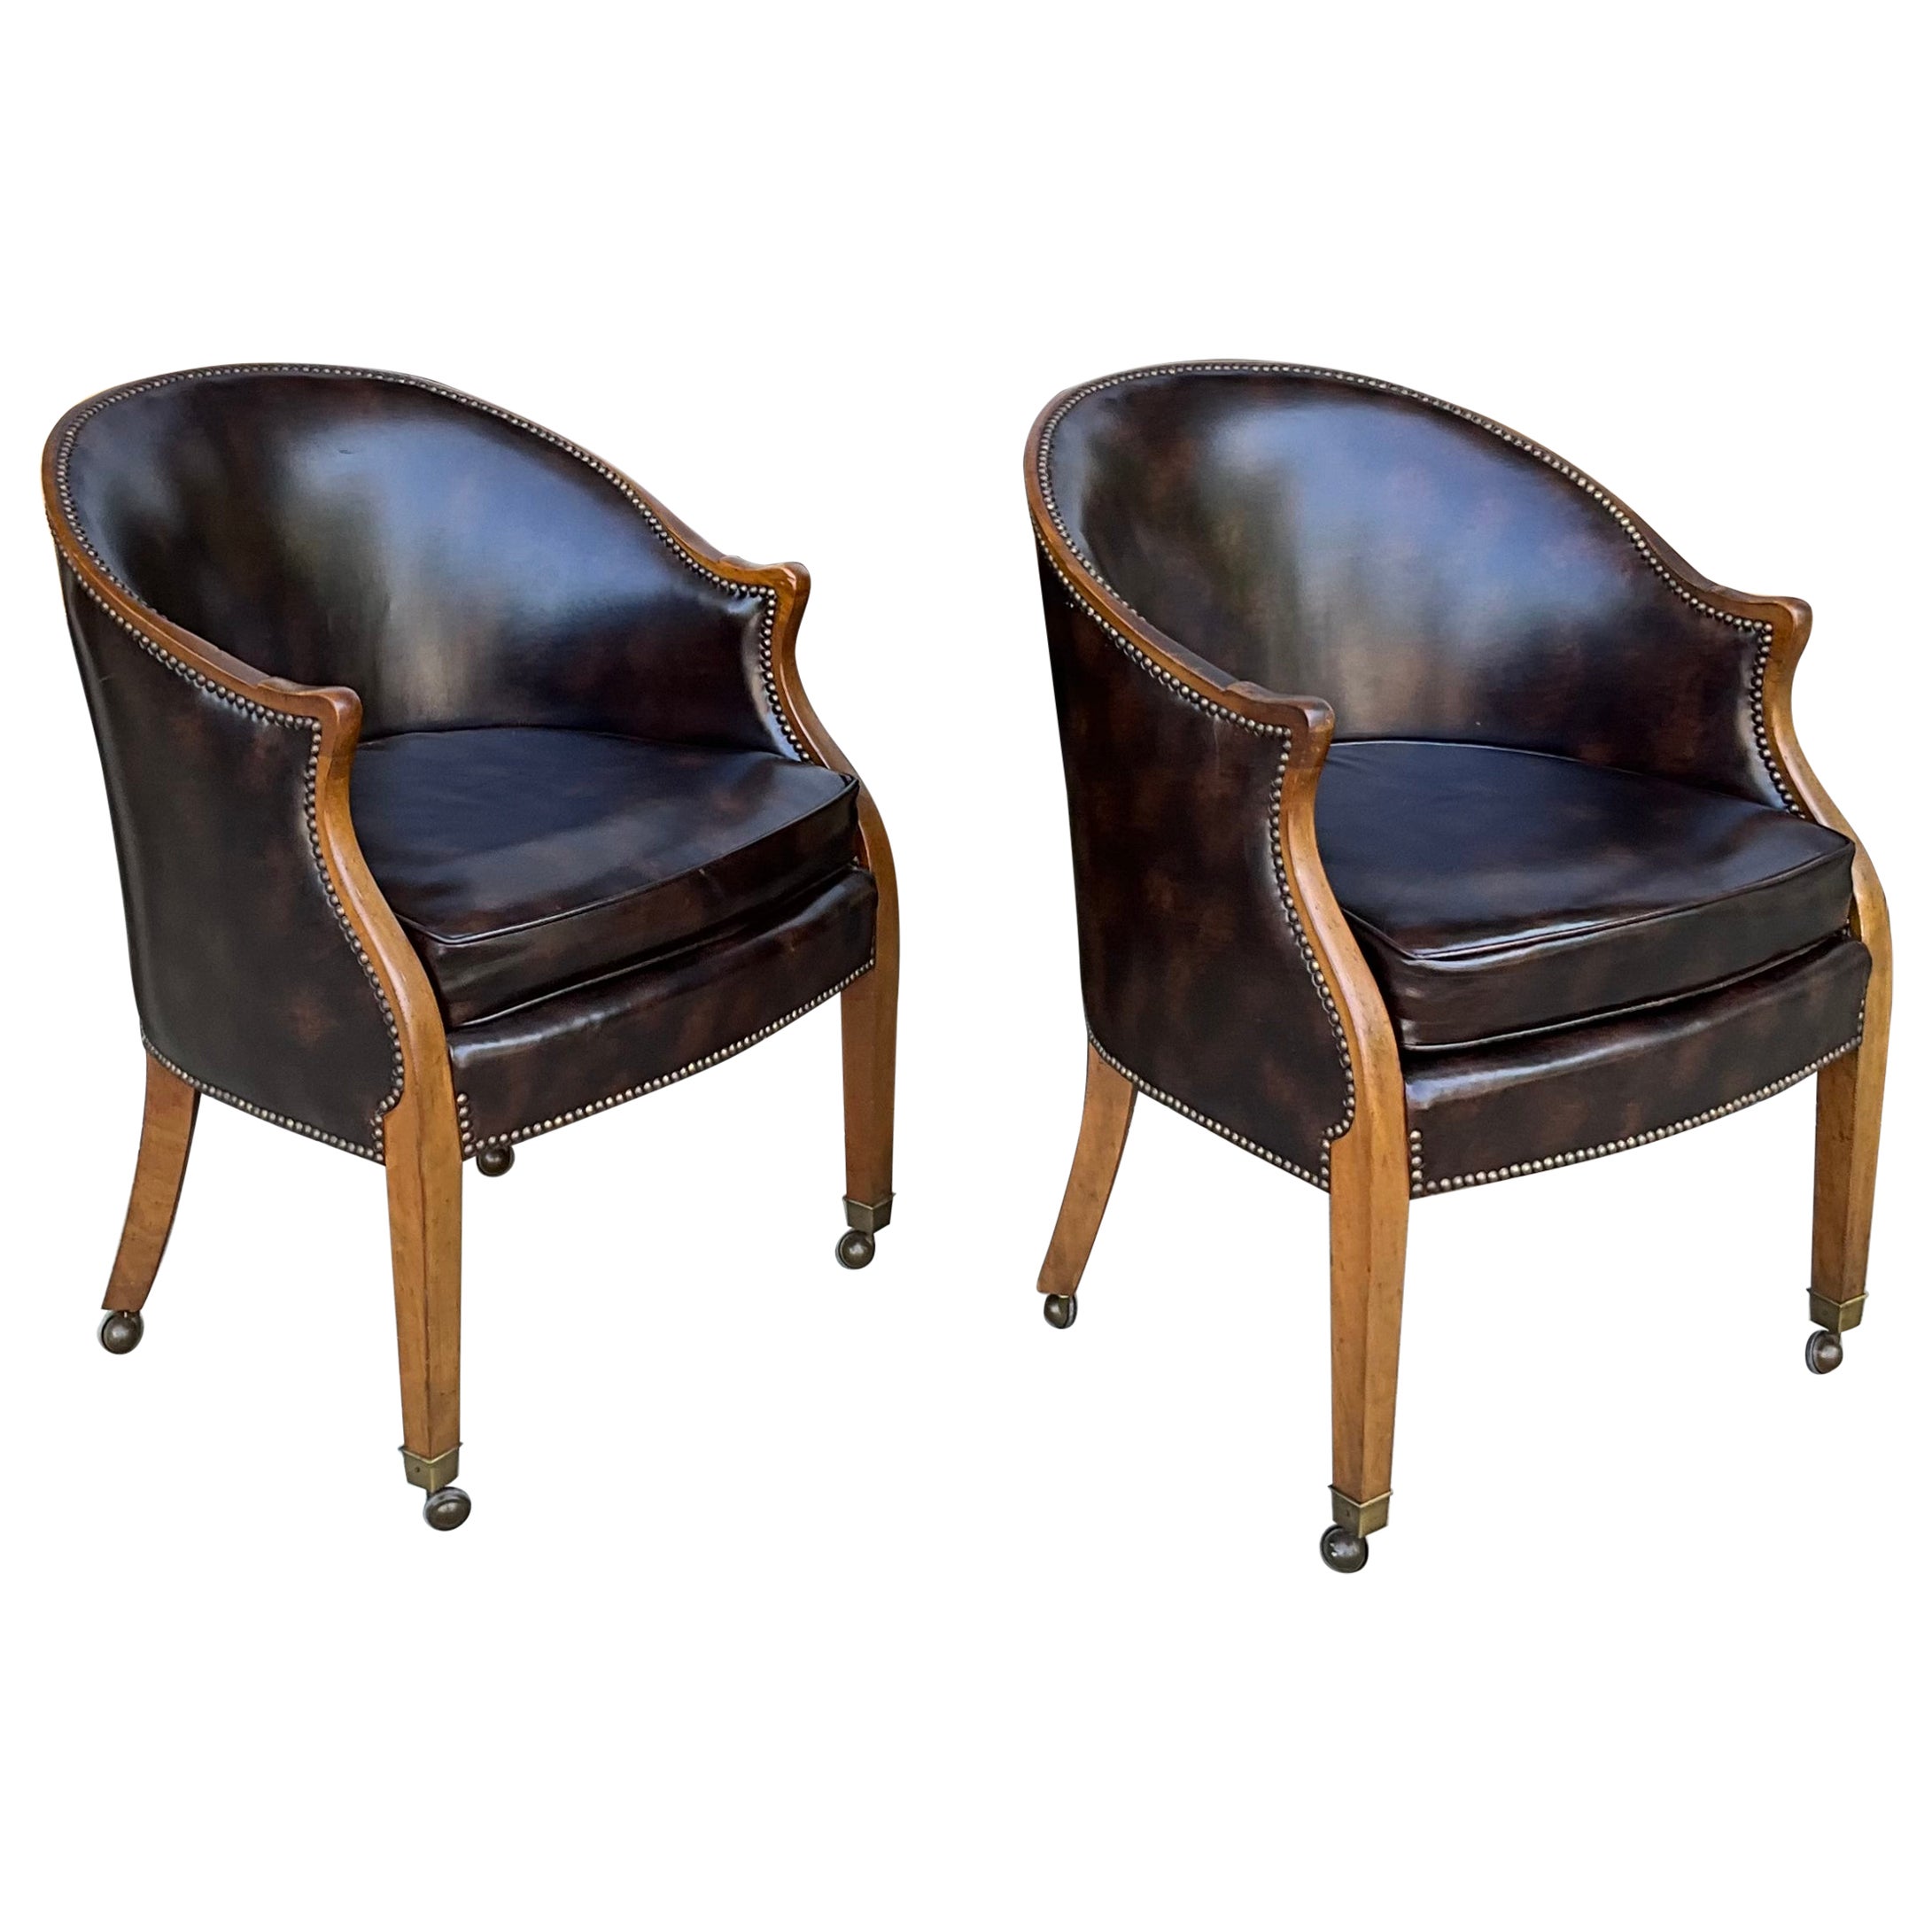  1970 Baker Furniture Leather , Brass & Fruitwood Barrel Back Chairs Pair